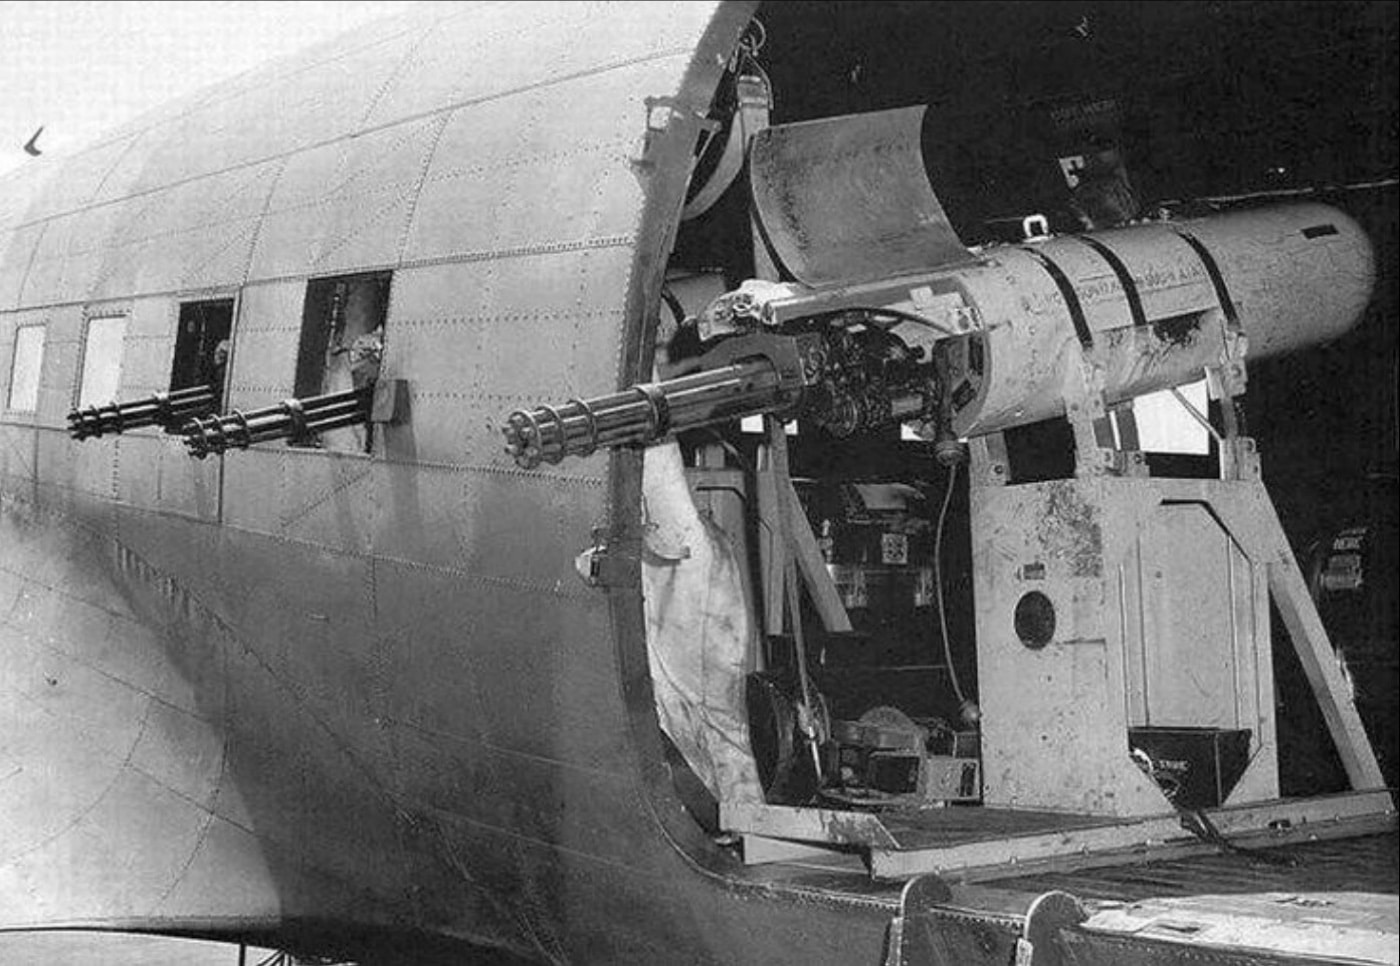 In this photograph we see a GAU-2/A minigun on an early prototype mount in the doorway of a AC-47 gunship. Early mounts like this one were improvised by crews in the field. The M134 Minigun is an American 7.62×51mm NATO six-barrel rotary machine gun with a high rate of fire. It features a Gatling-style rotating barrel assembly with an external power source, normally an electric motor. It was designed and manufactured by the General Electric company.